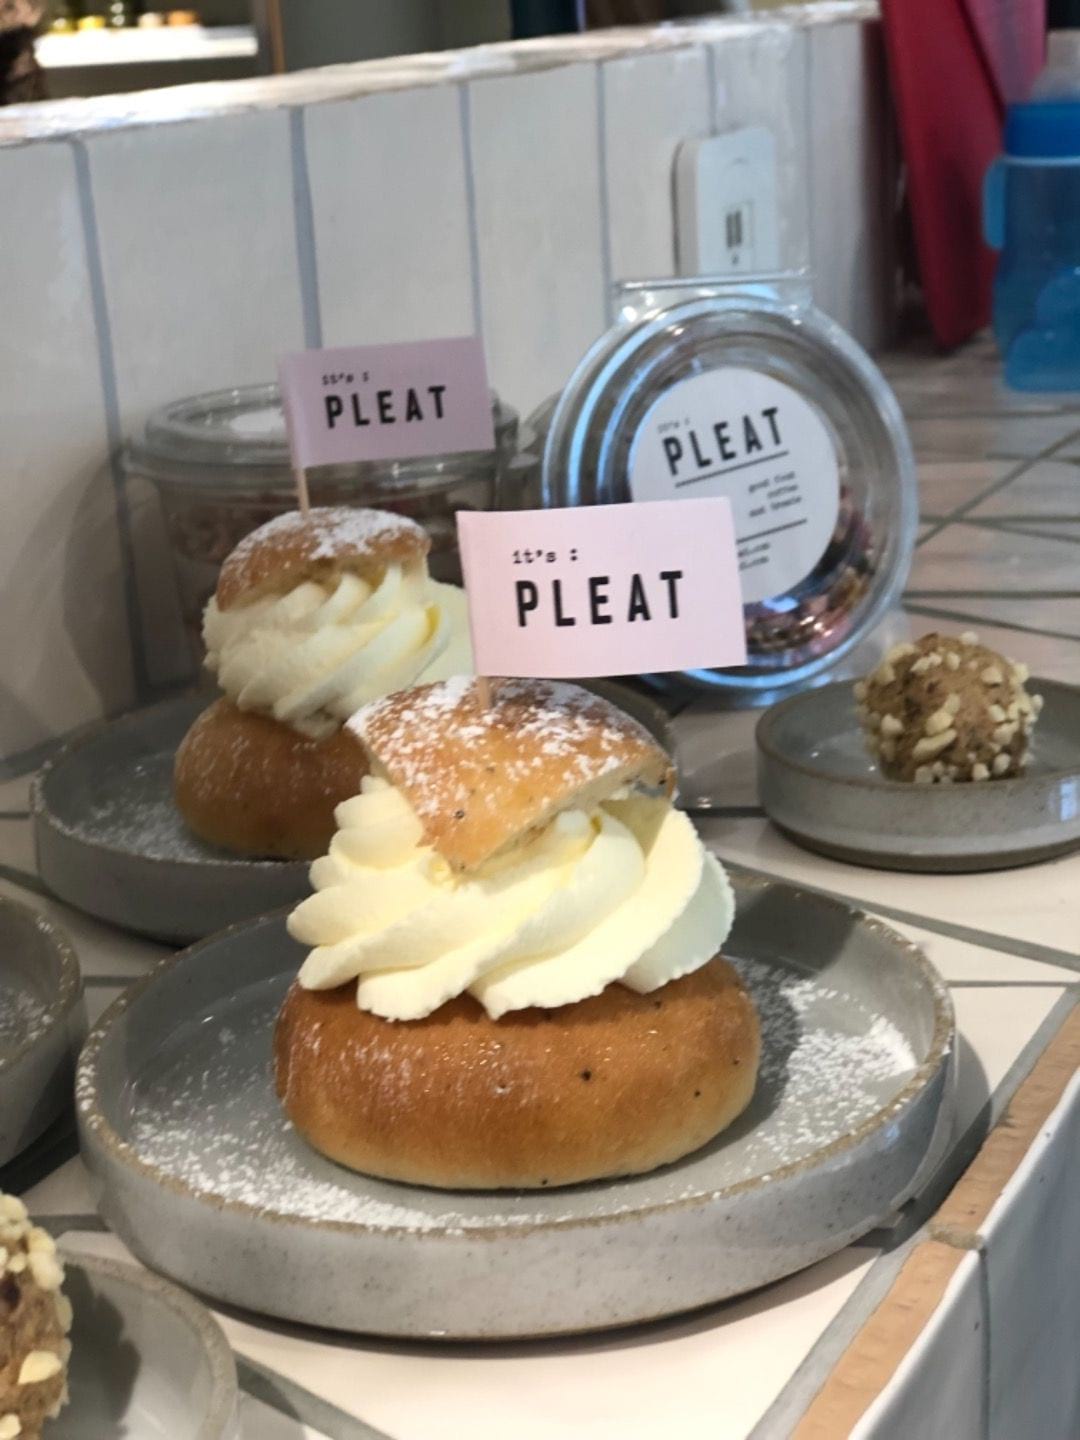 Semla – Photo from It's Pleat by Agnes L. (05/02/2019)